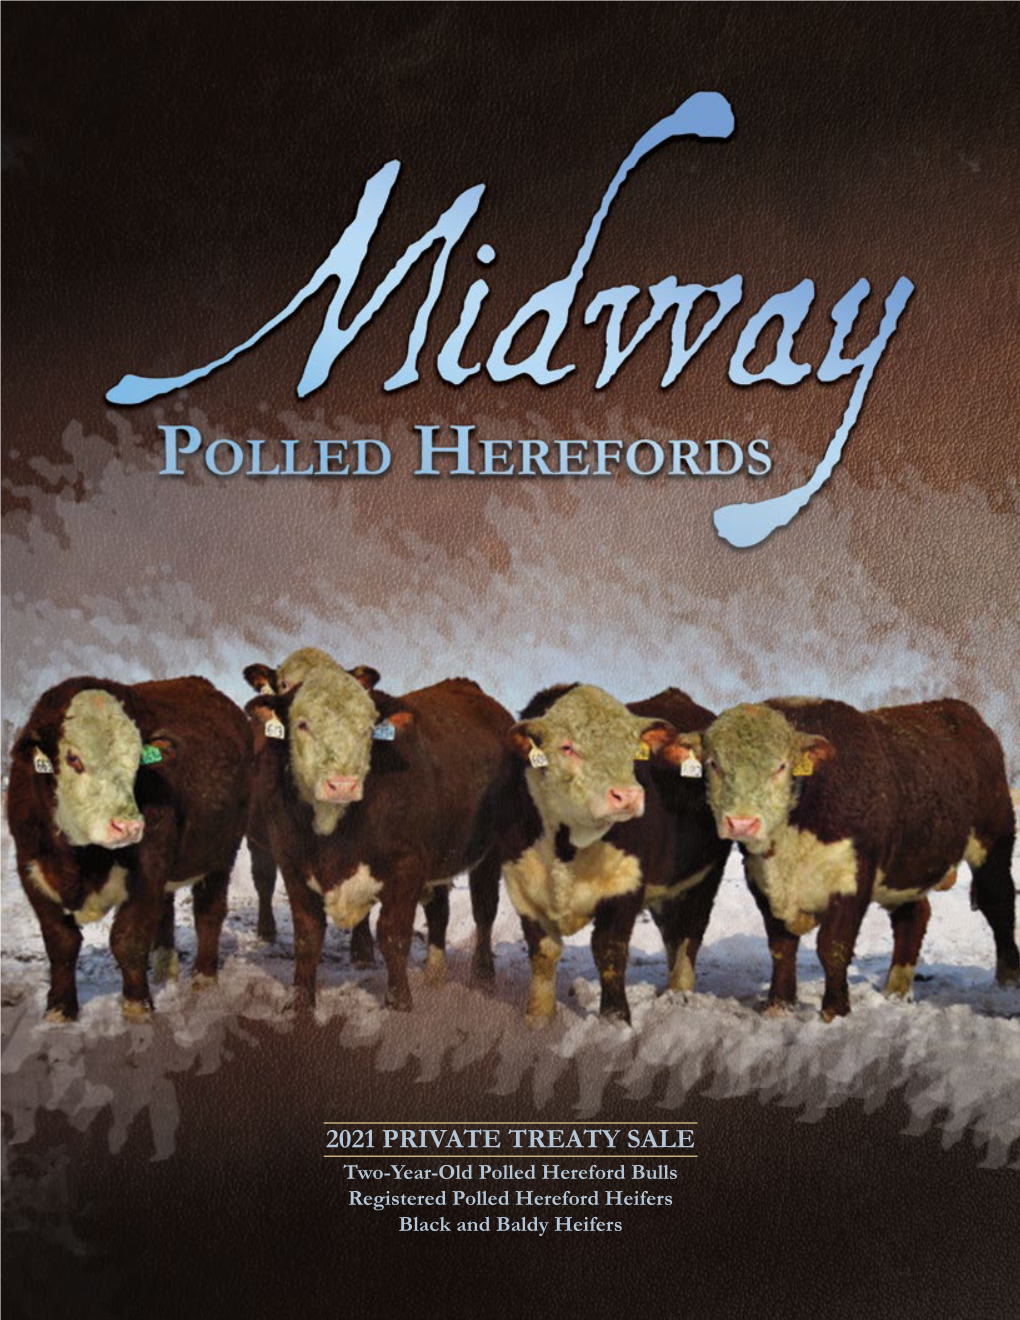 2021 PRIVATE TREATY SALE Two-Year-Old Polled Hereford Bulls Registered Polled Hereford Heifers Black and Baldy Heifers 2021 Private Treaty Sale Offering